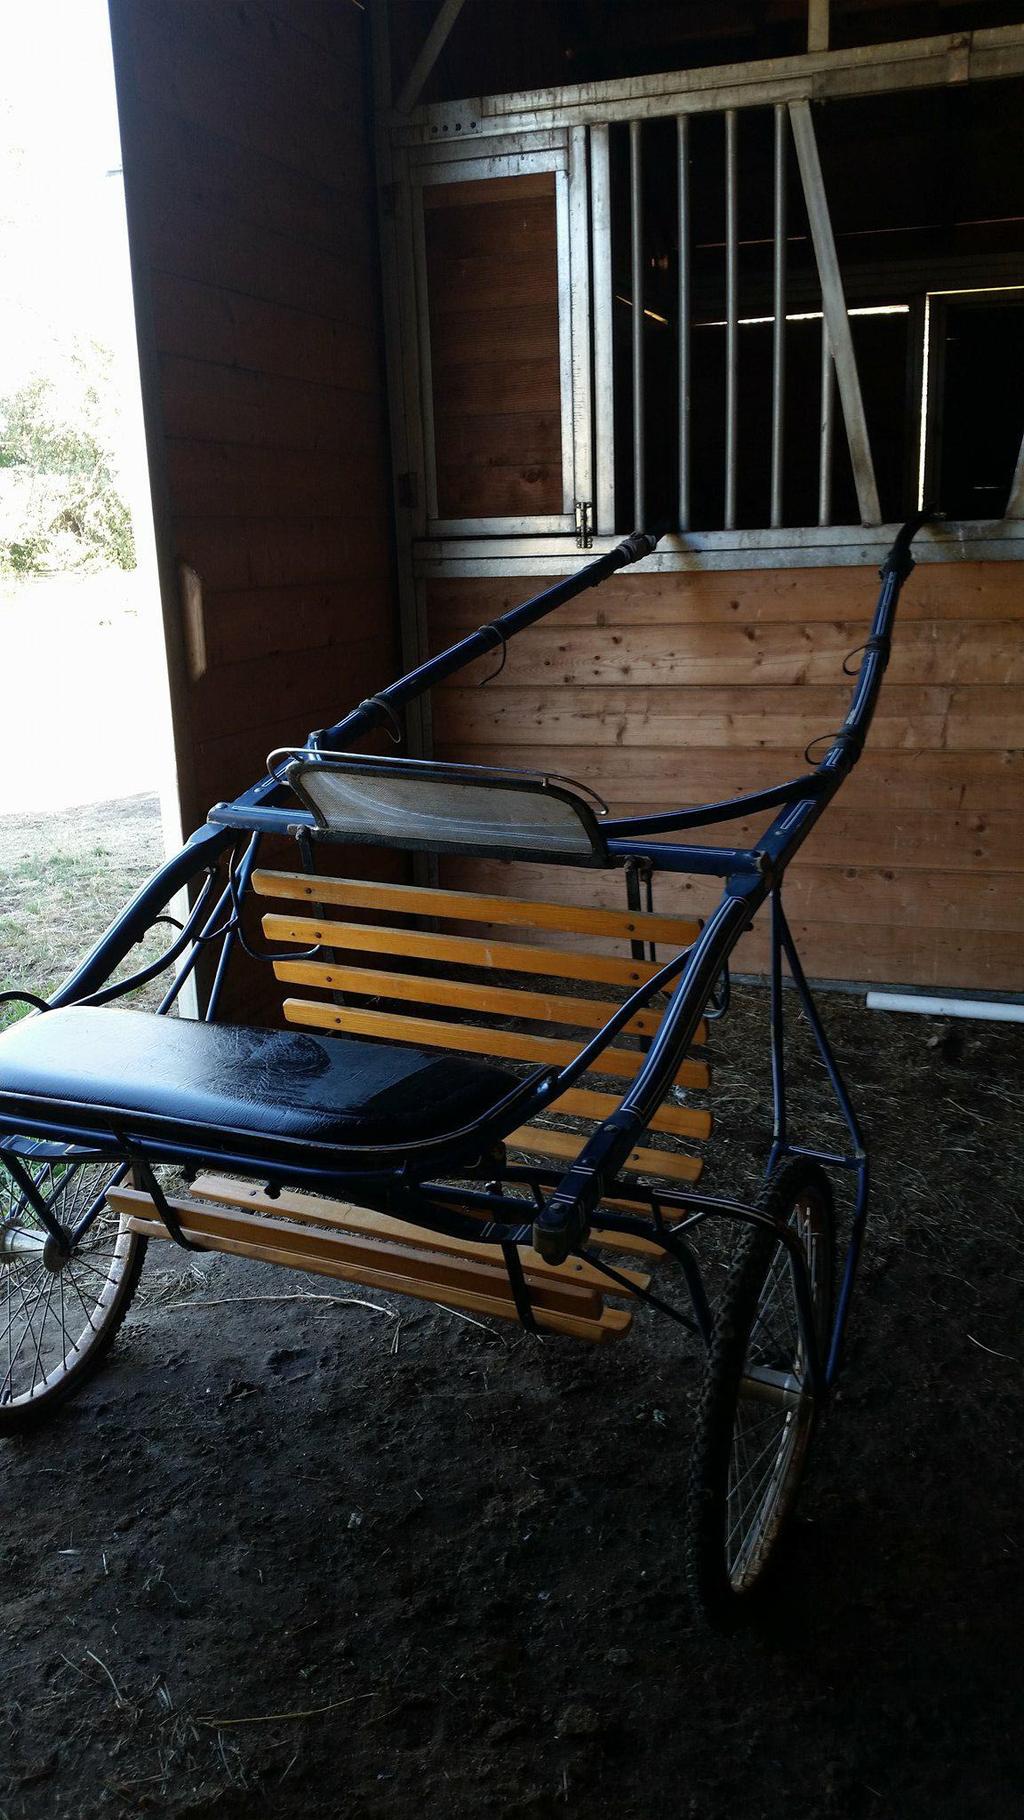 Wilform Cart for sale $500 Contact Debbie Erickson, 970-433-1262 Reminder: Classified